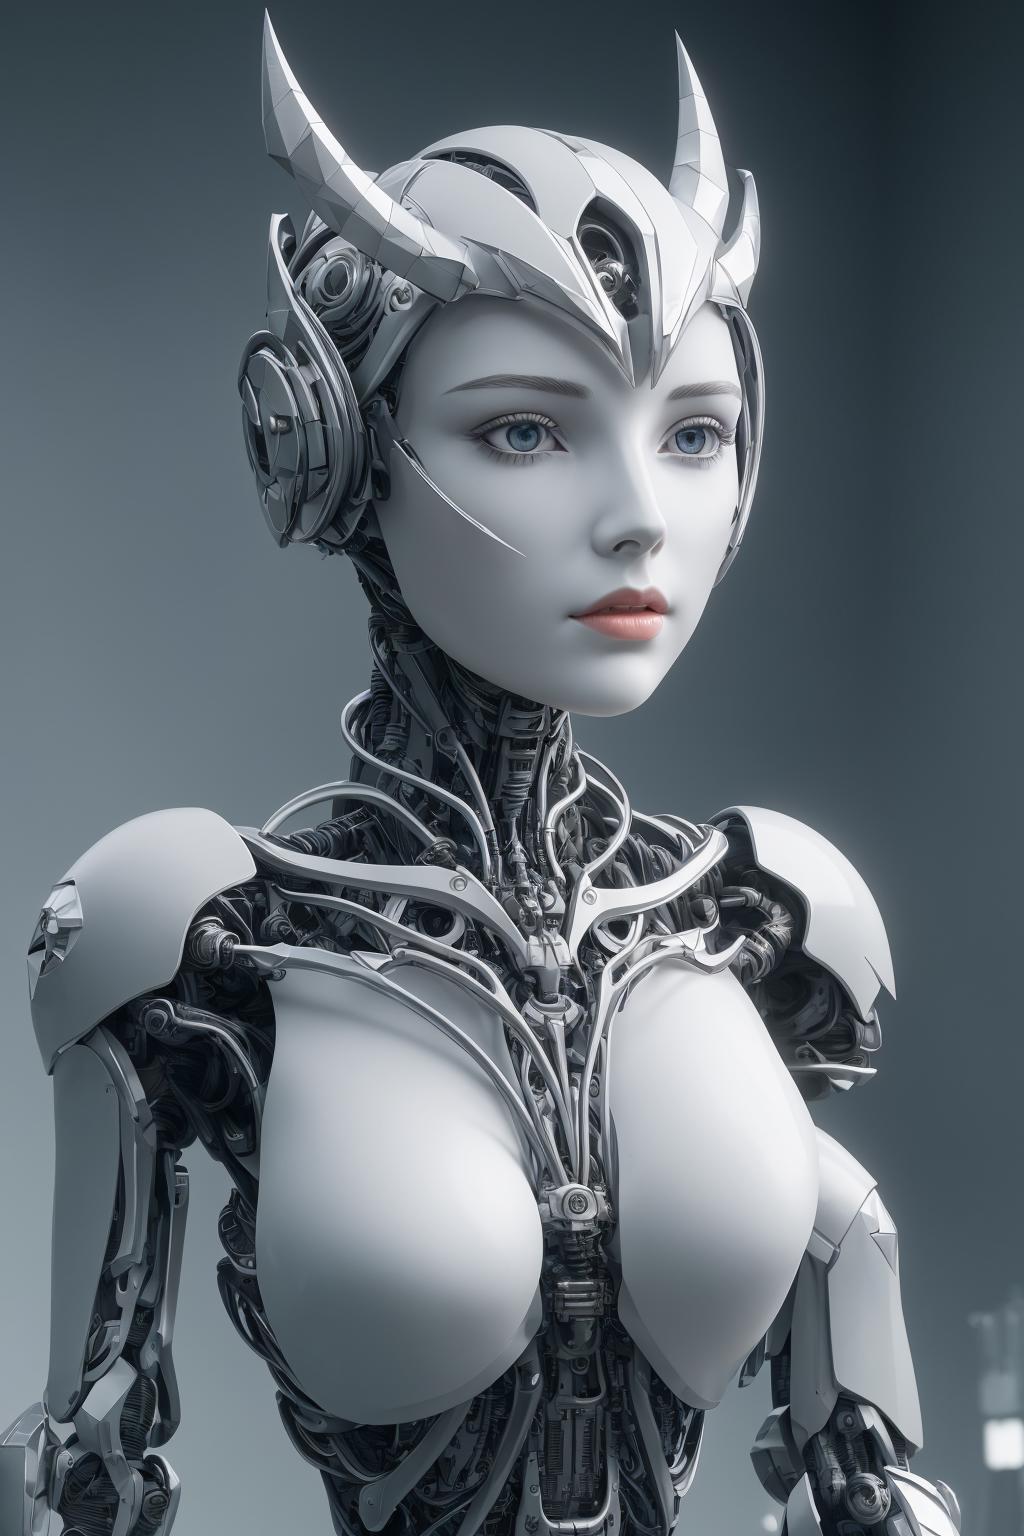 AI model image by rjox